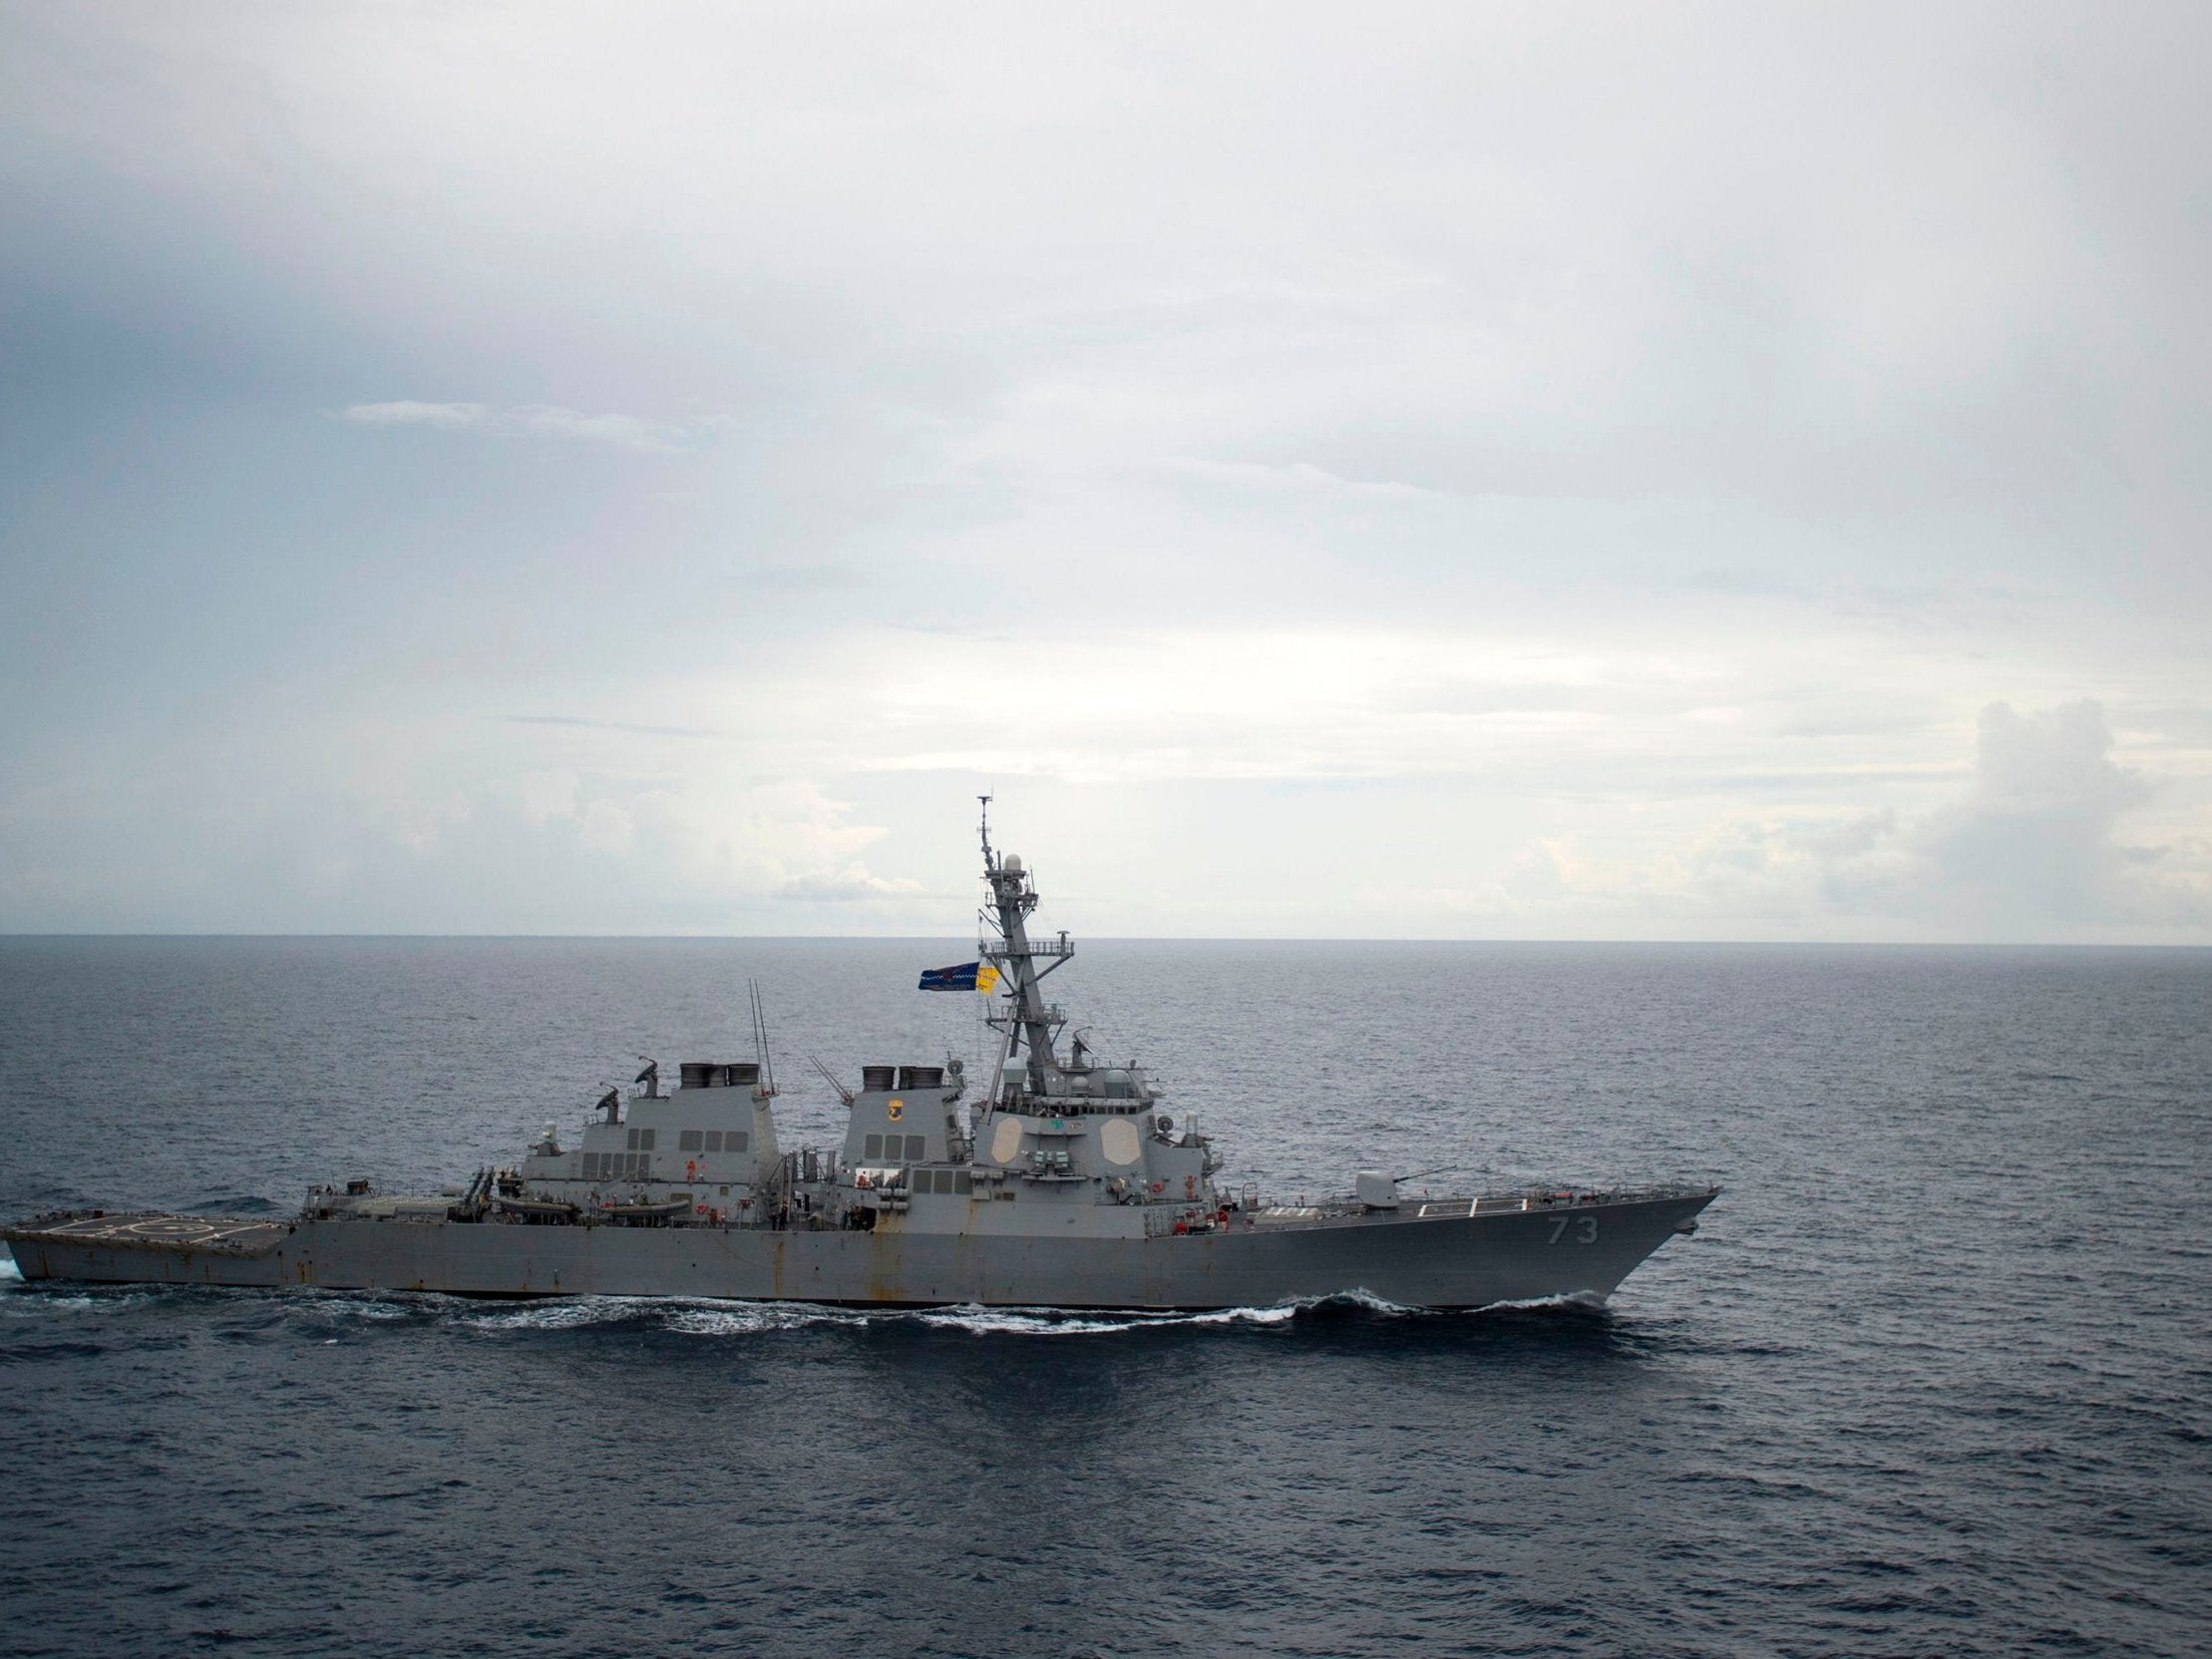 The USS Decatur was on a routine mission in the South China Sea when it came close to a Chinese warship